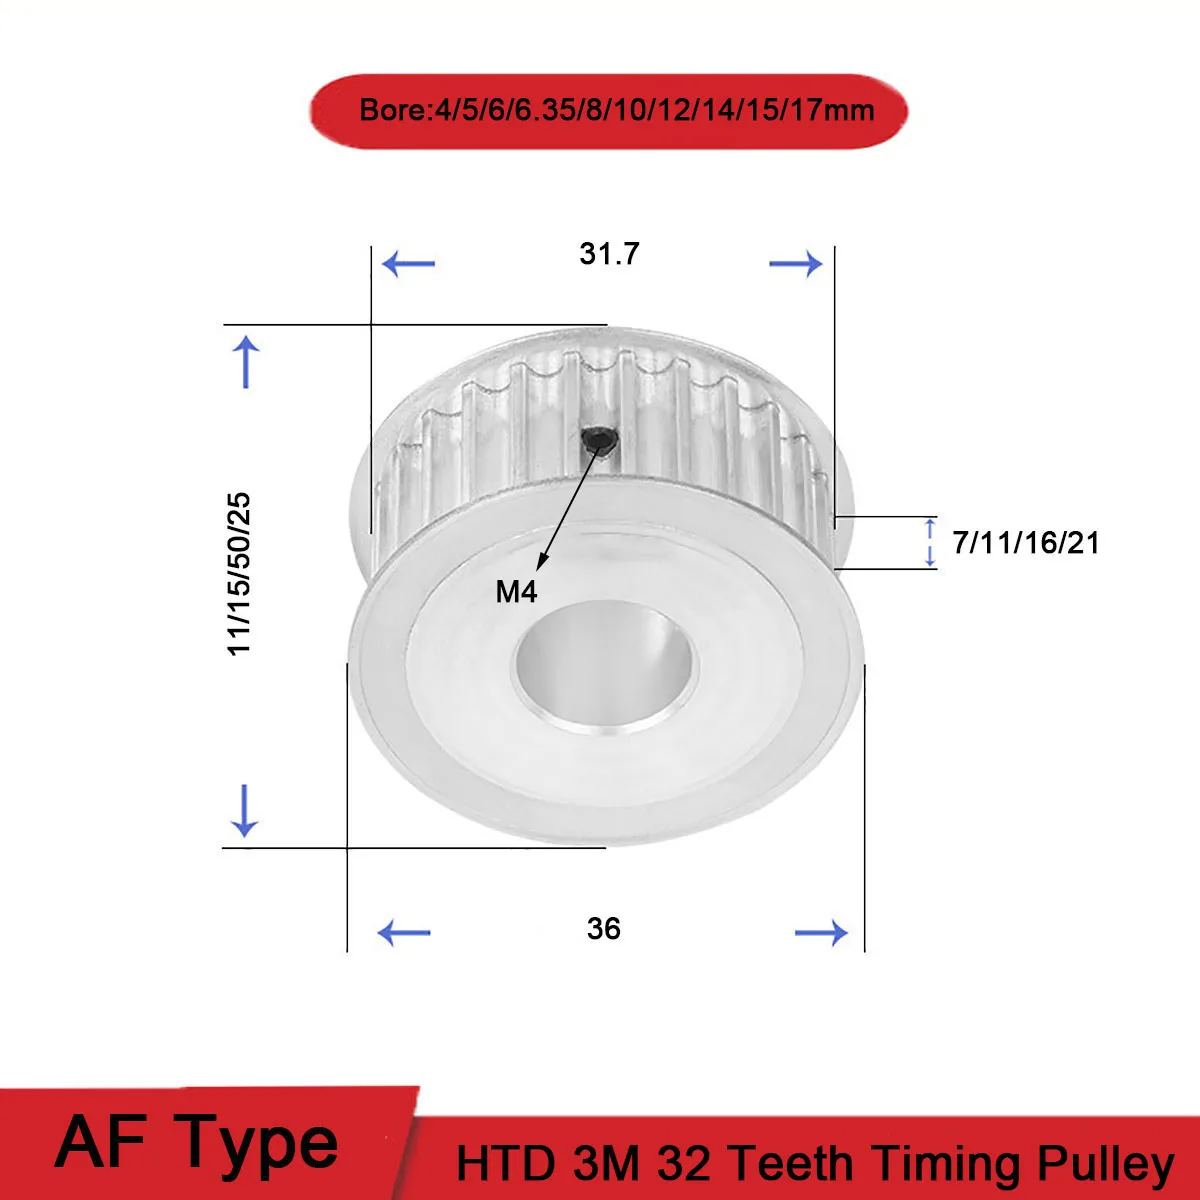 

HTD 3M 32 Teeth Timing Pulley Bore 4~20mm Gear Pulley 3mm Pitch Teeth Width 7/11/16/21mm Aluminum Synchronous Timing Belt Pulley